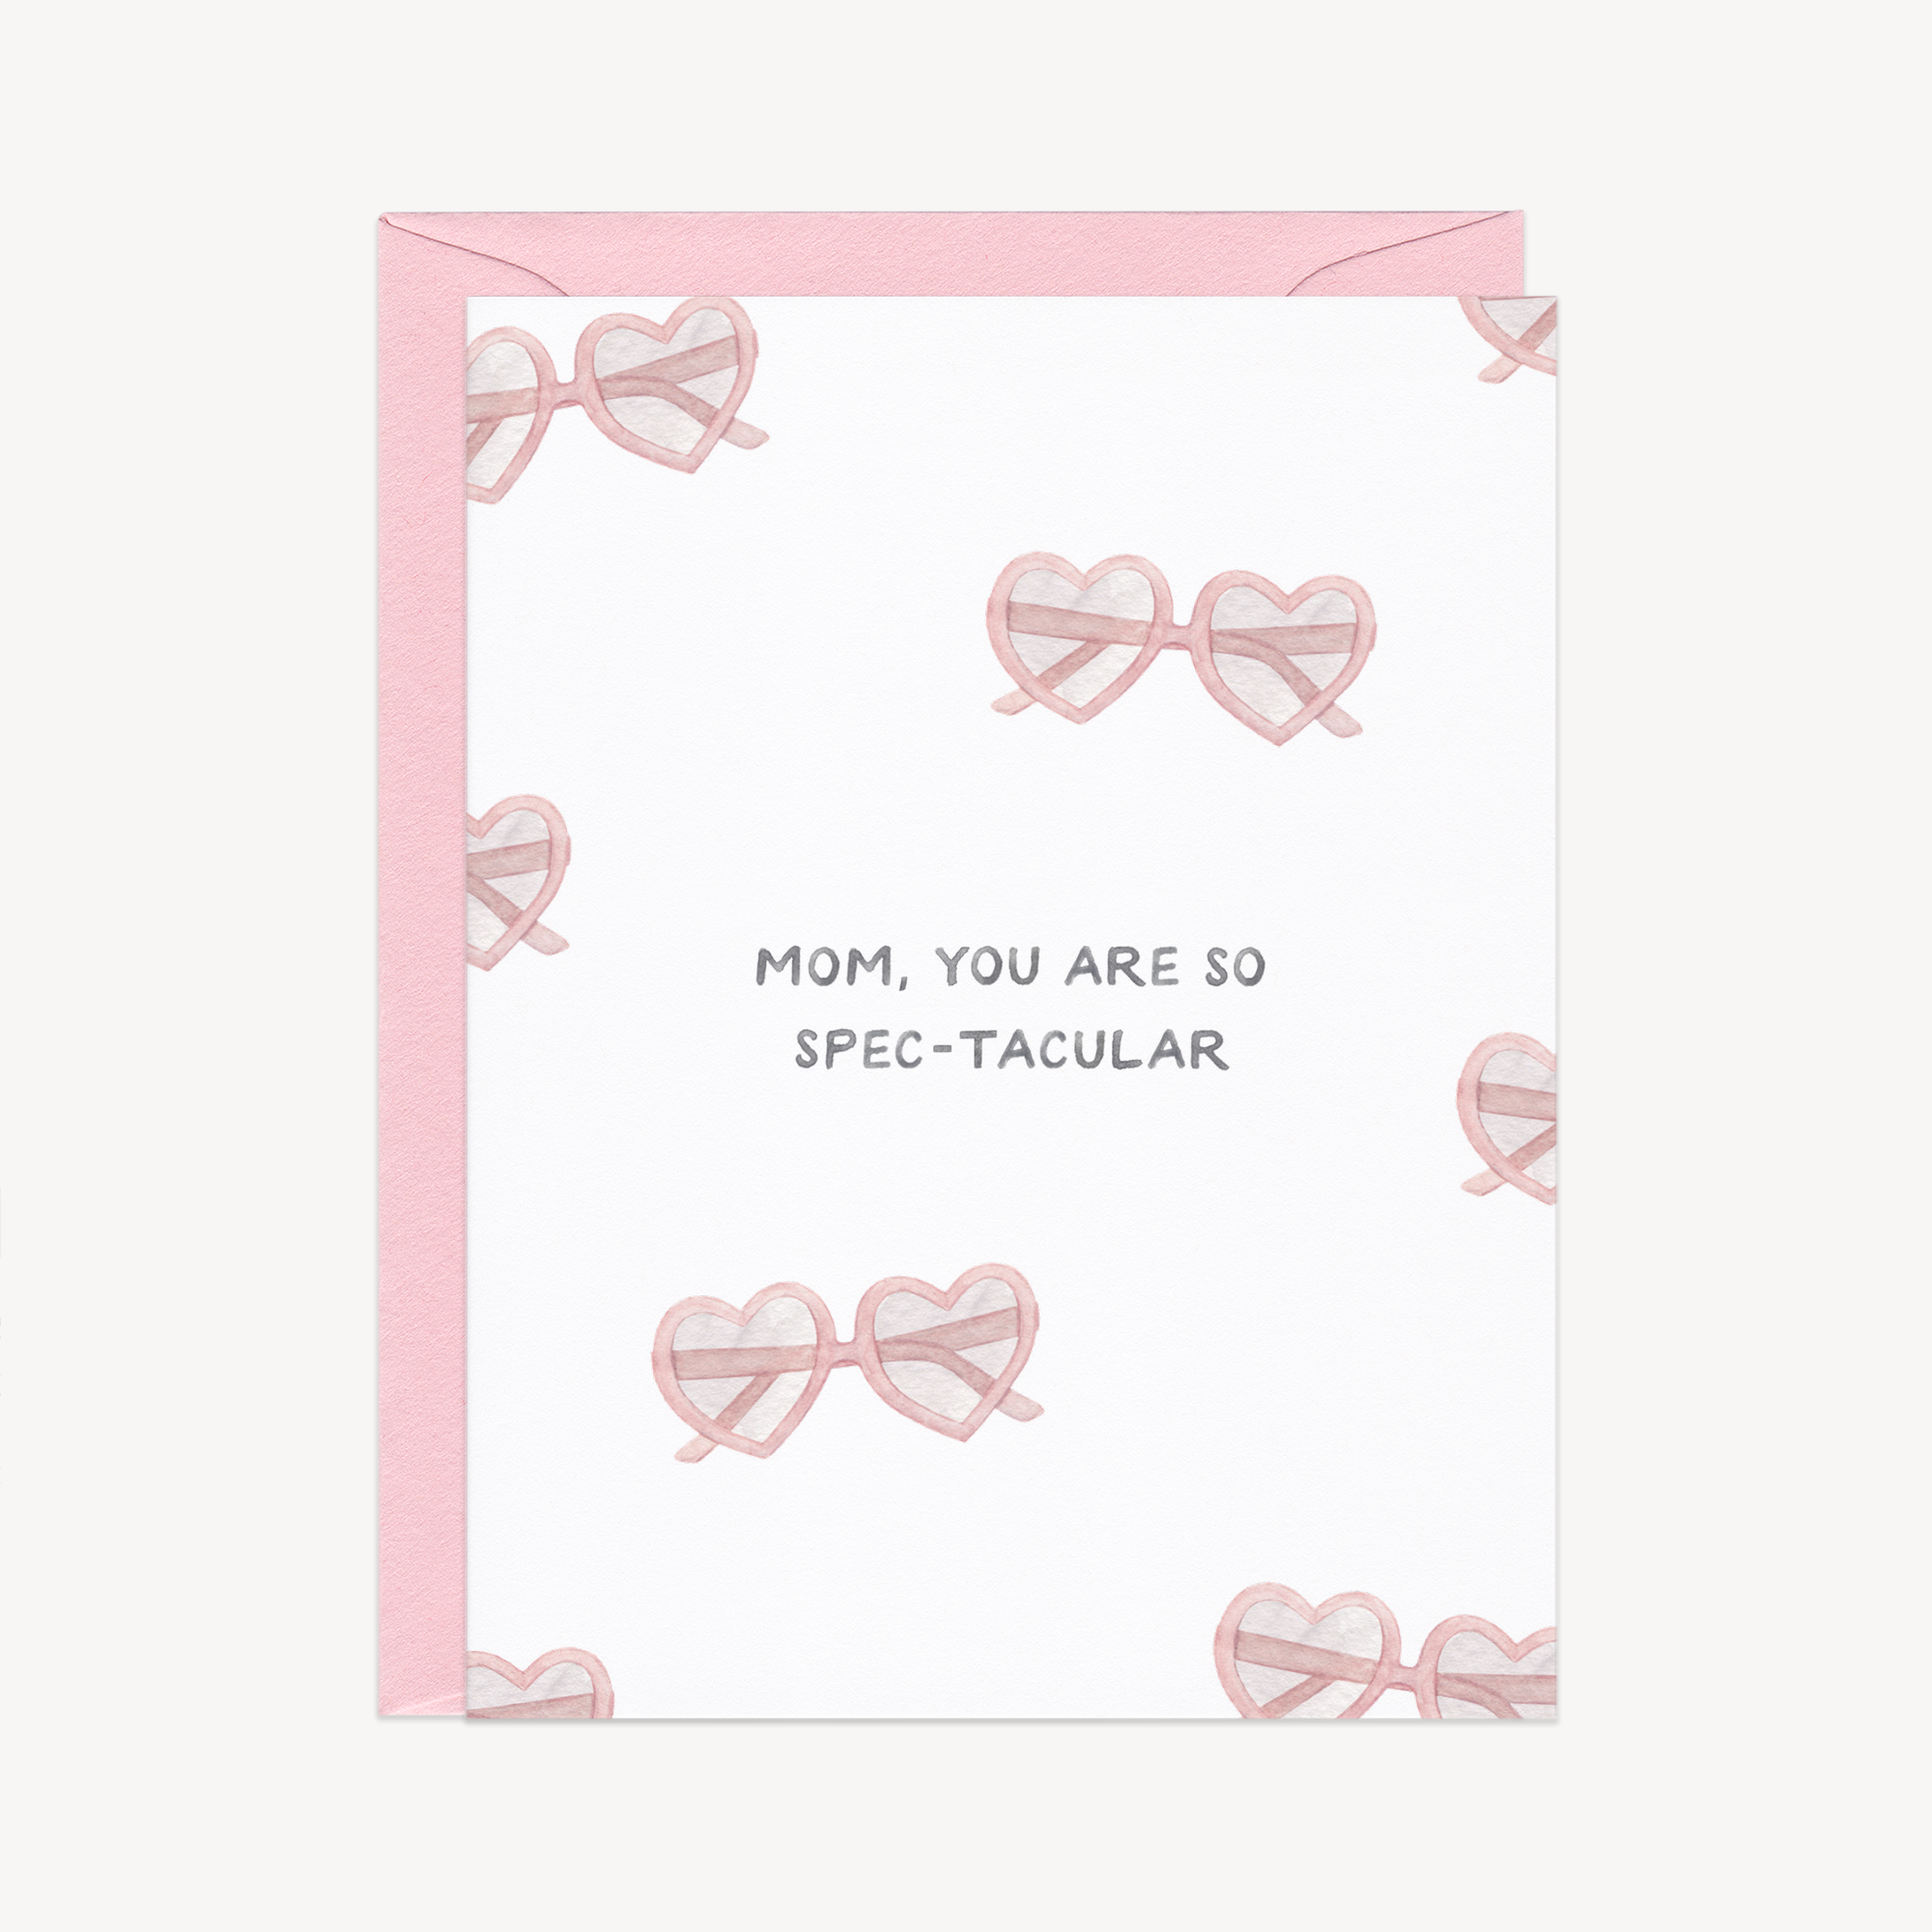 Heart Eyes Spec-tacular Mother’s Day Card